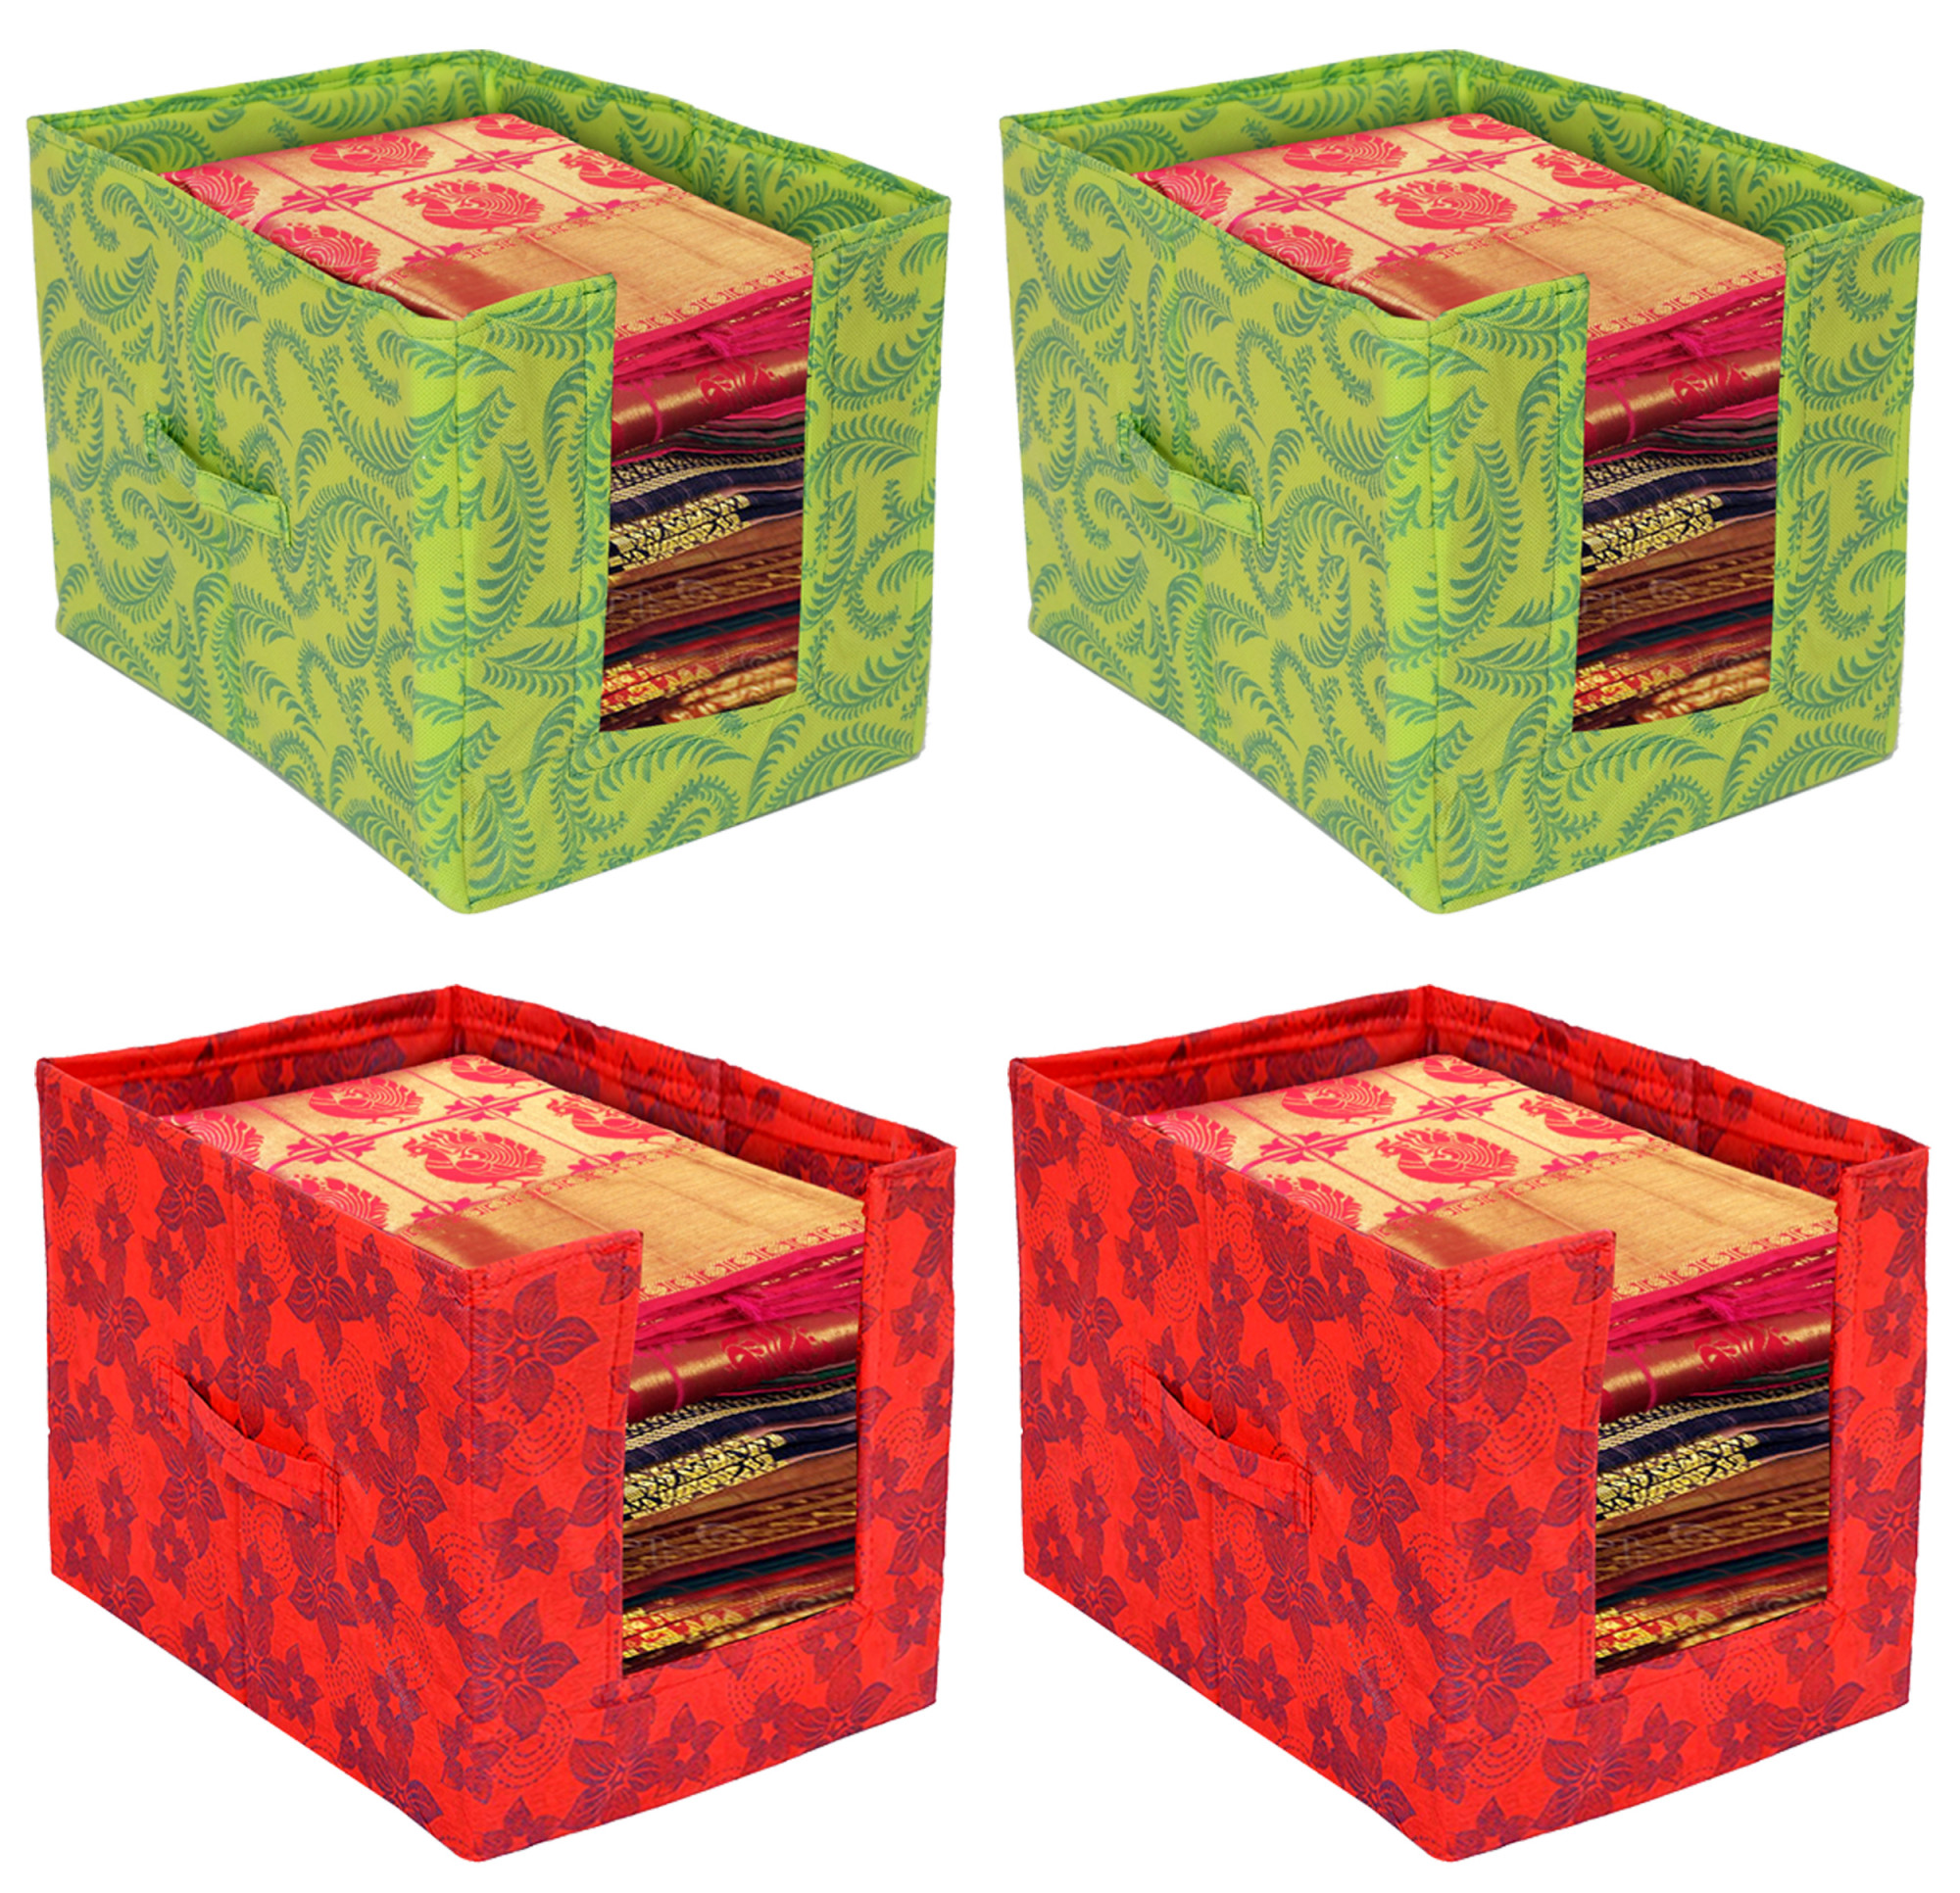 Kuber Industries Metalic Flower Print Foldable Rectangle Cloth Saree Stacker Cloth Wardrobe Organizer- Pack of 4 (Green & Red)